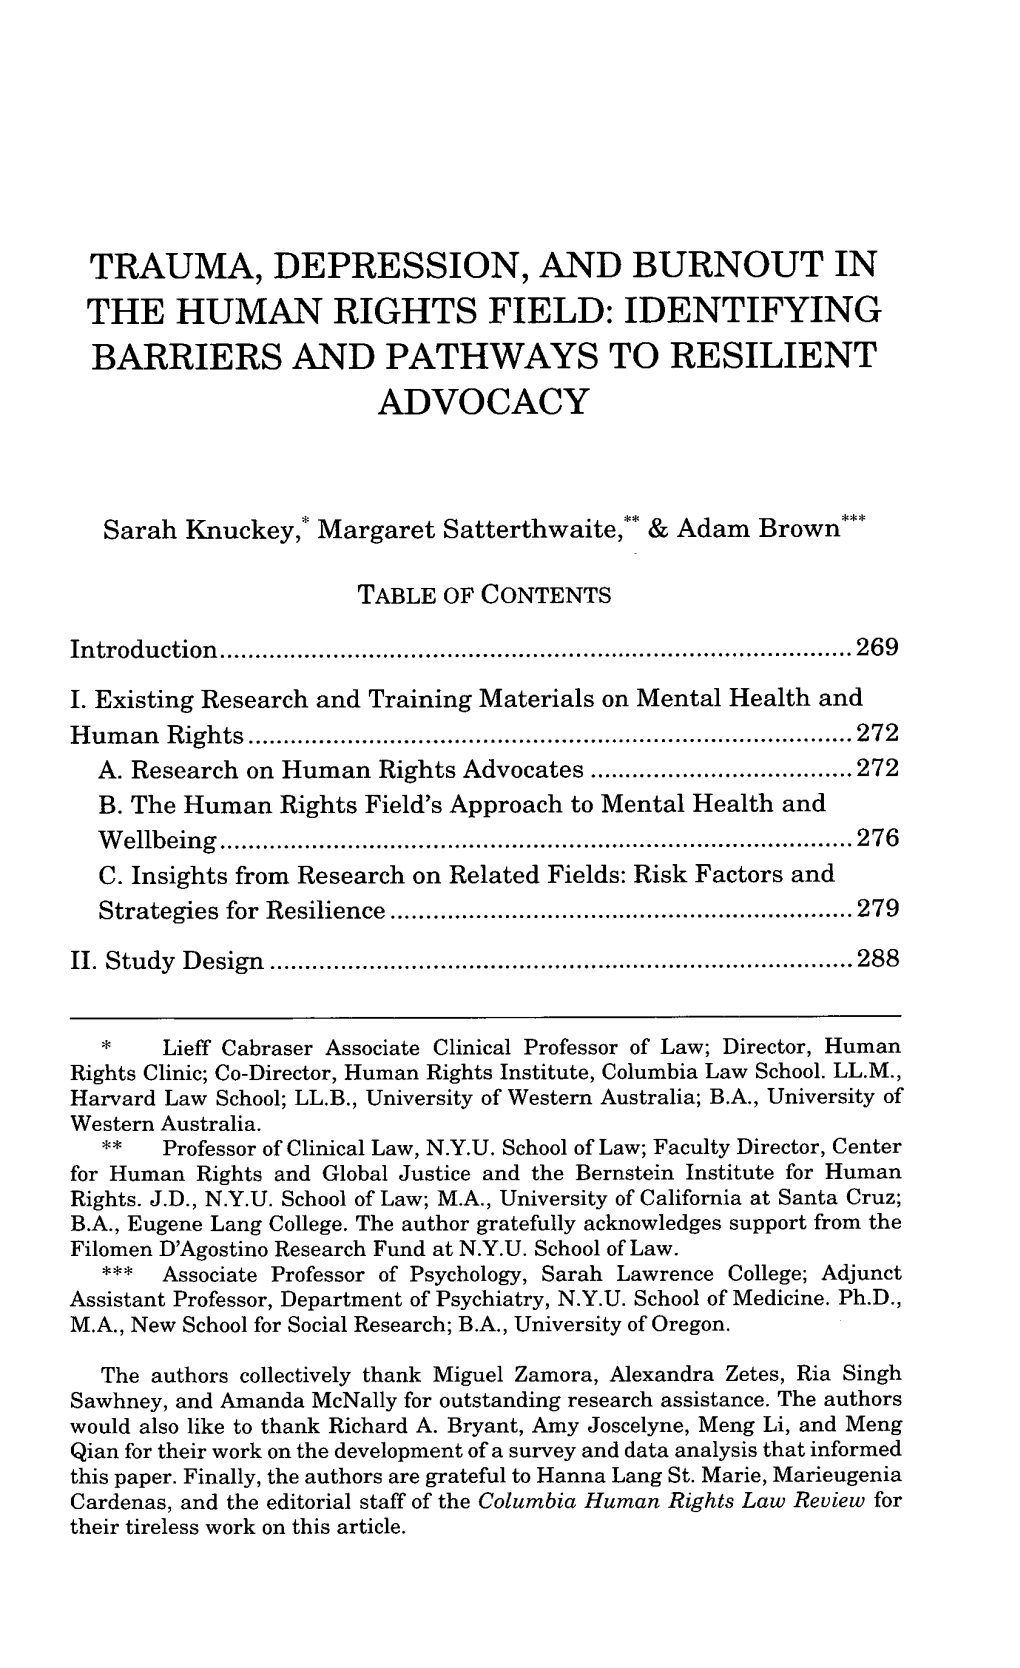 Trauma, Depression, and Burnout in the Human Rights Field: Identifying Barriers and Pathways to Resilient Advocacy